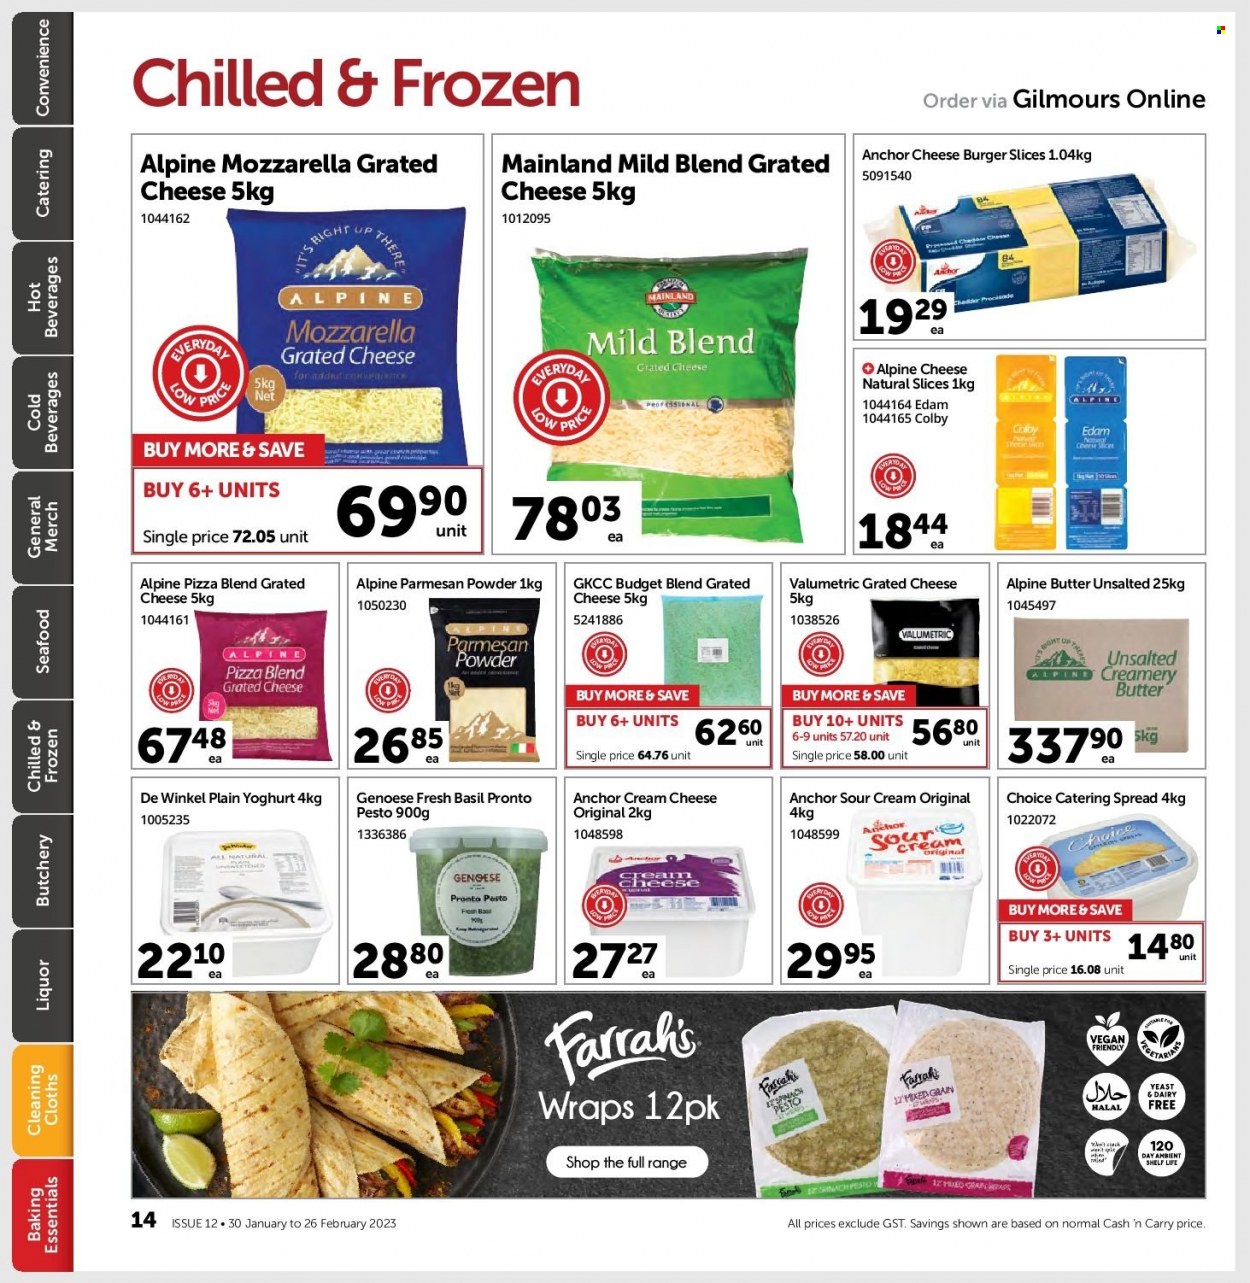 thumbnail - Gilmours mailer - 30.01.2023 - 26.02.2023 - Sales products - wraps, seafood, pizza, Colby cheese, cream cheese, edam cheese, sliced cheese, parmesan, grated cheese, yoghurt, yeast, butter, Anchor, sour cream, pesto. Page 13.